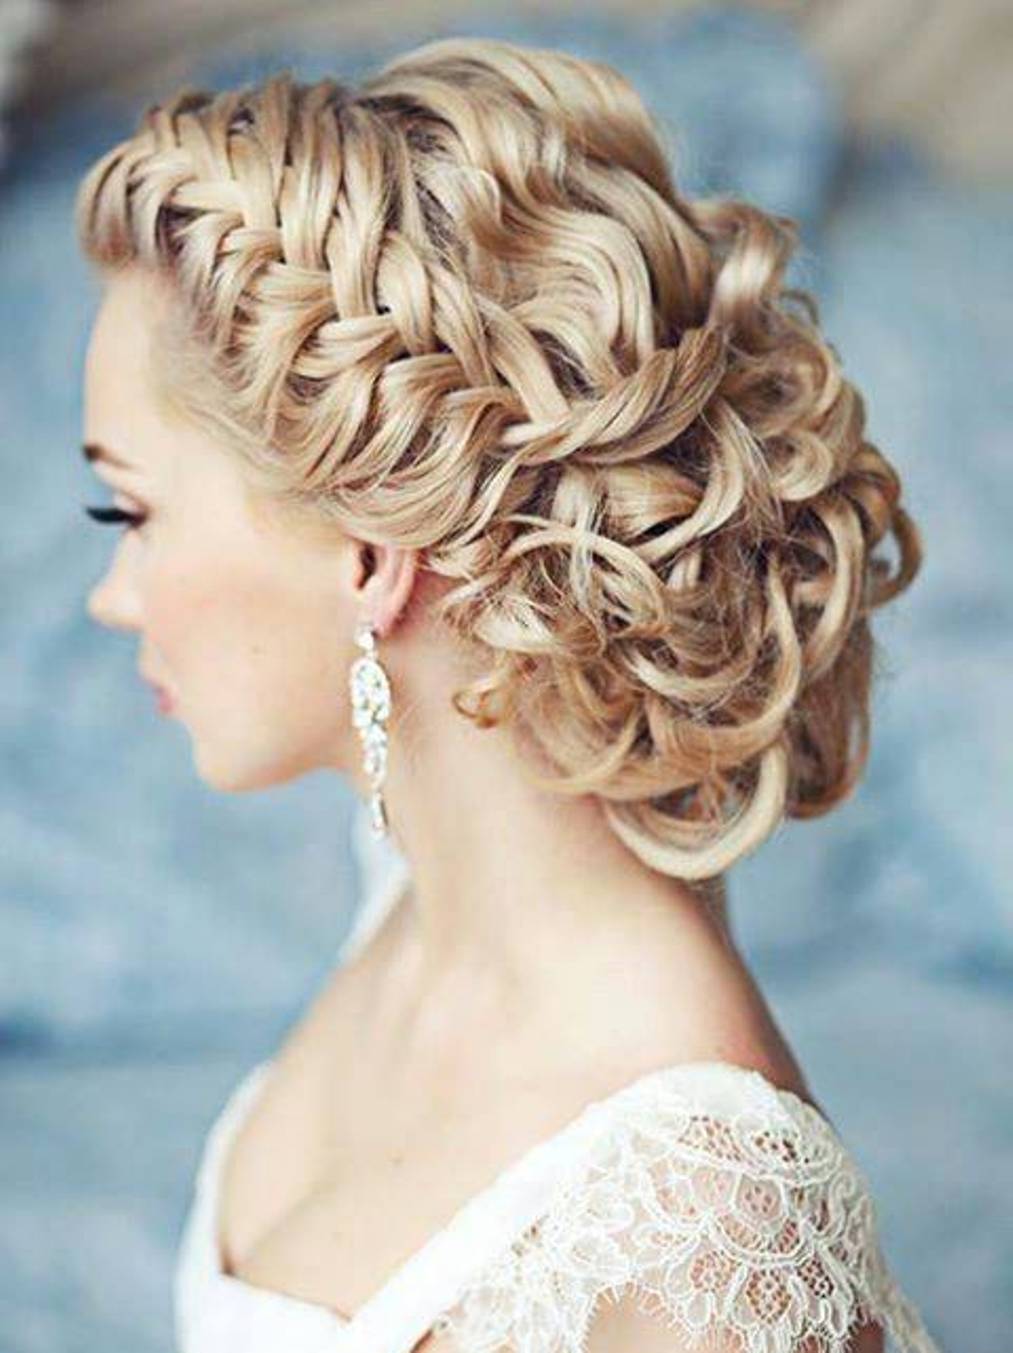 South #Indian #bridal #hairstyle | Indian wedding hairstyles, Short wedding  hair, Indian bridal hairstyles